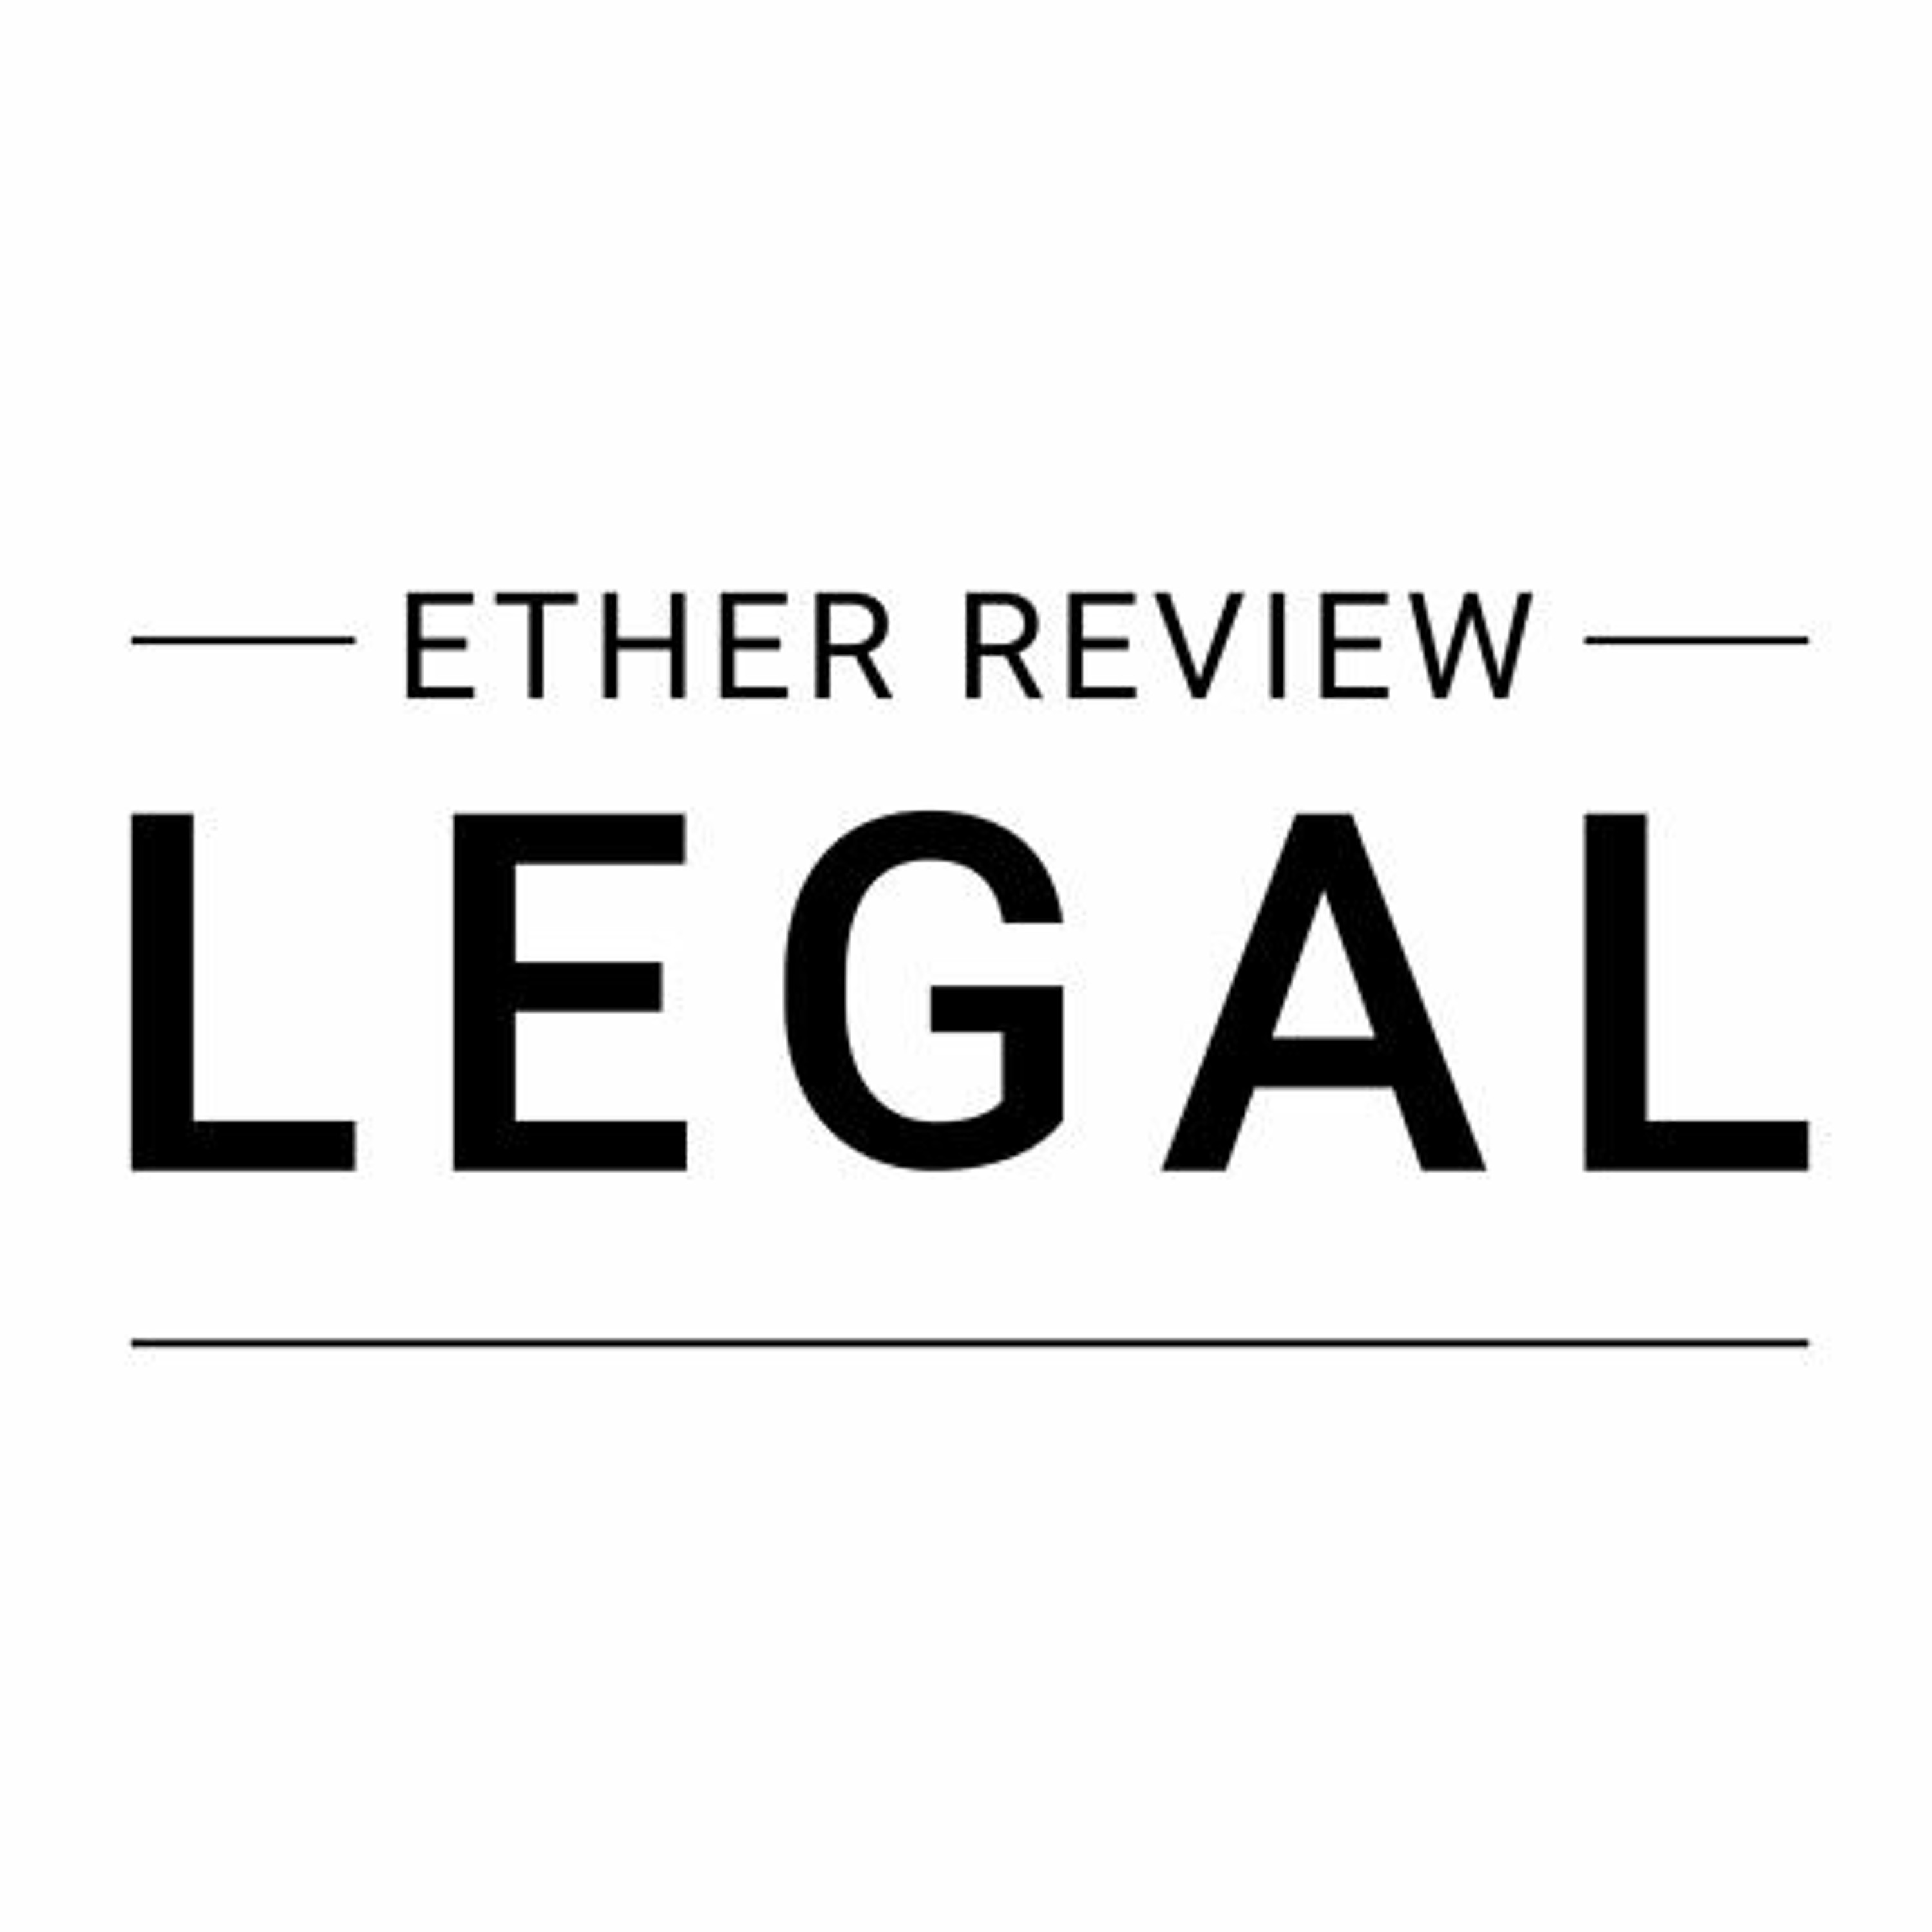 Ether Review Legal #3 - The Simple Agreement for Future Tokens